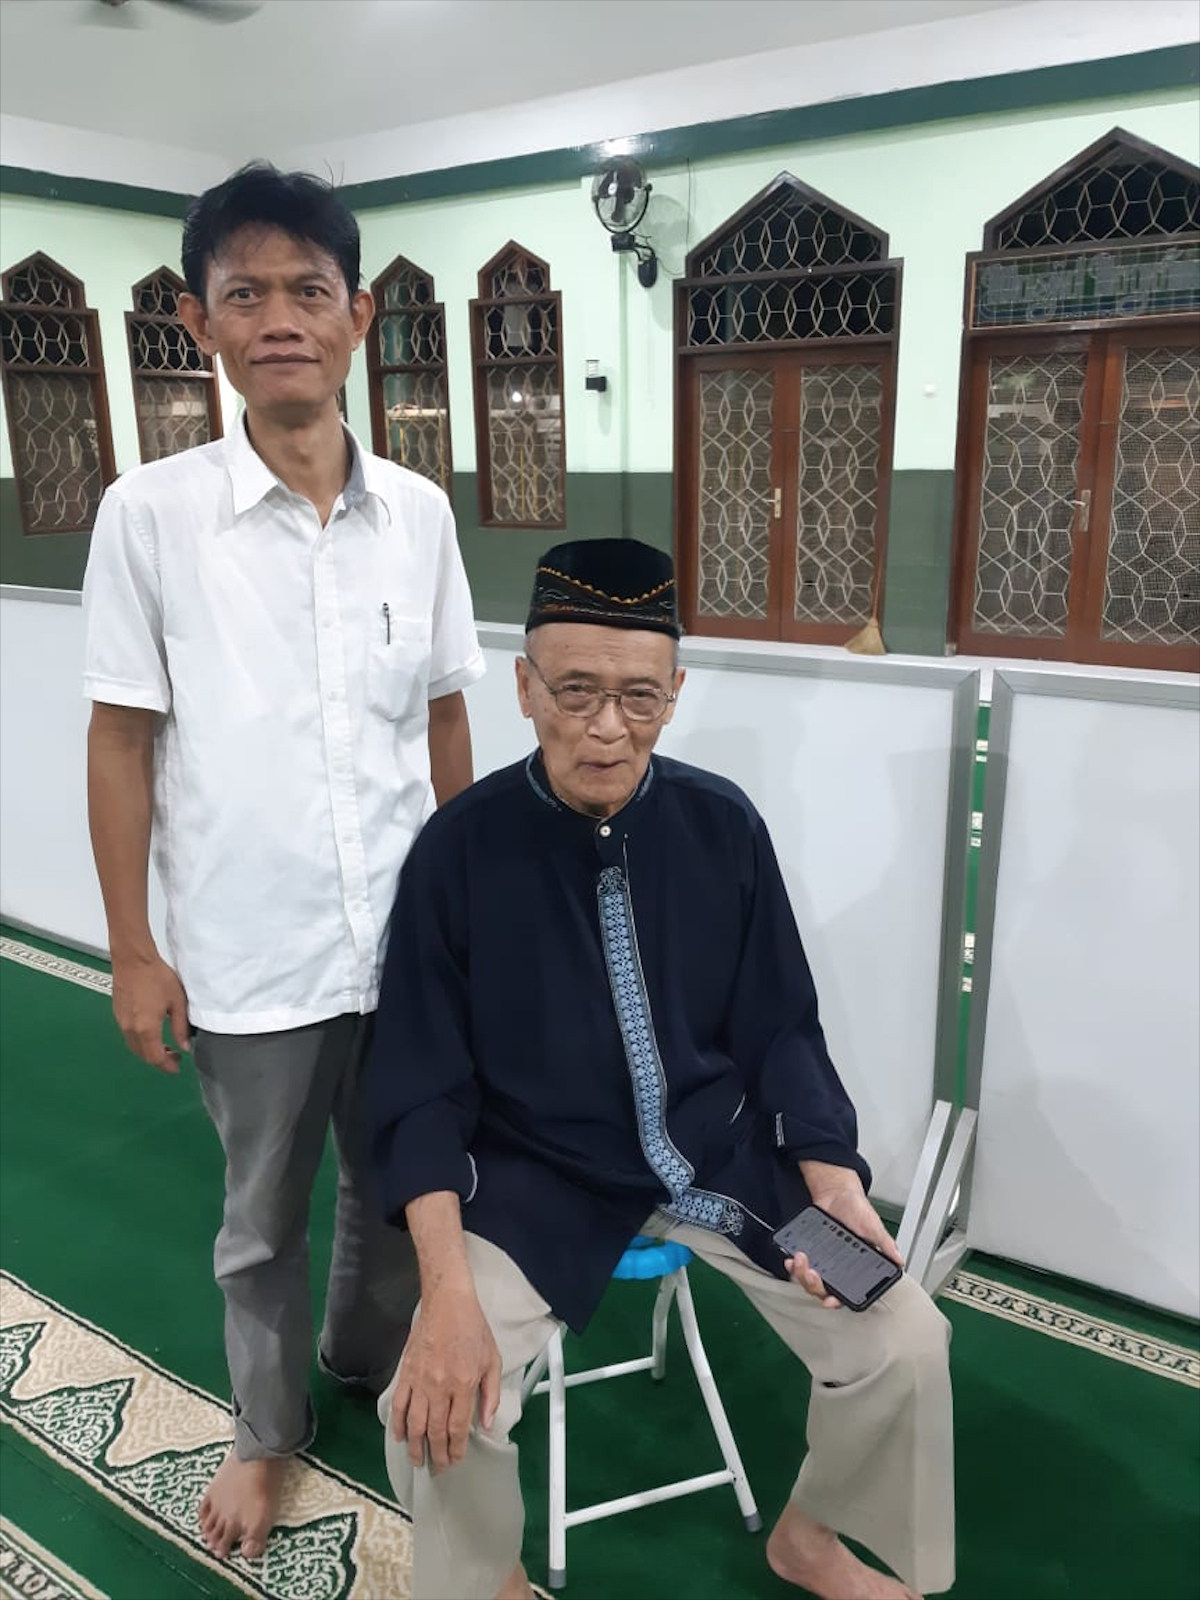 Ahmad Syafi’i Maarif, popularly known as Buya Syafi’i, was an Indonesian Islamic scholar and intellectual, who passed away at the age of 86 on May 27, 2022. Photo: Handout